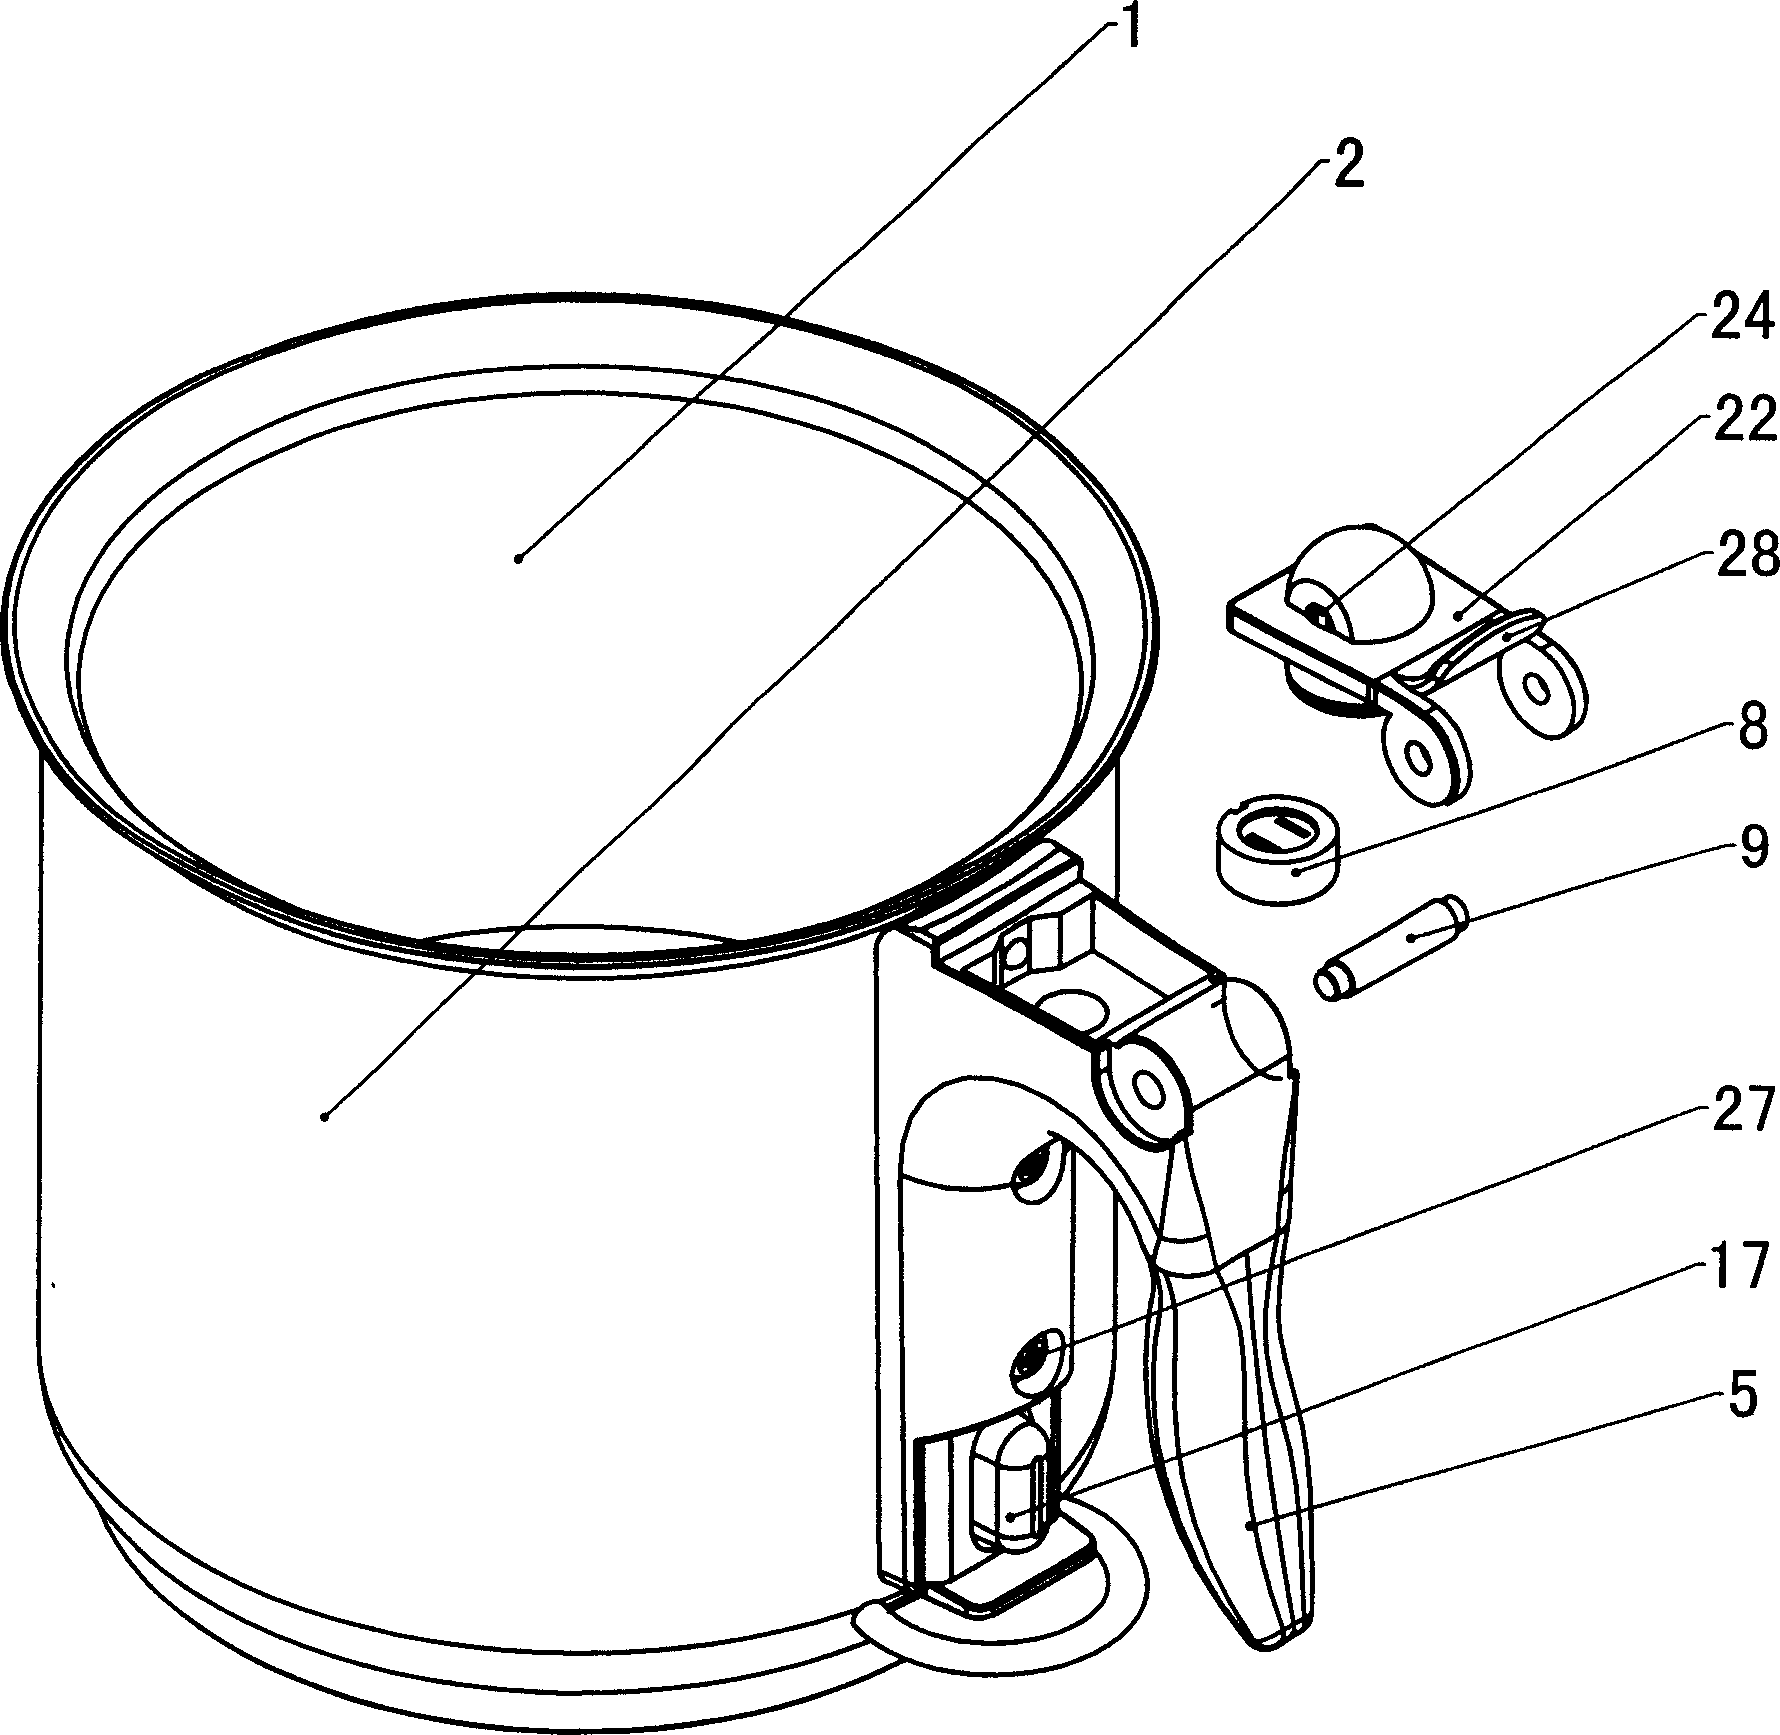 Double-layered stewpot with whistle